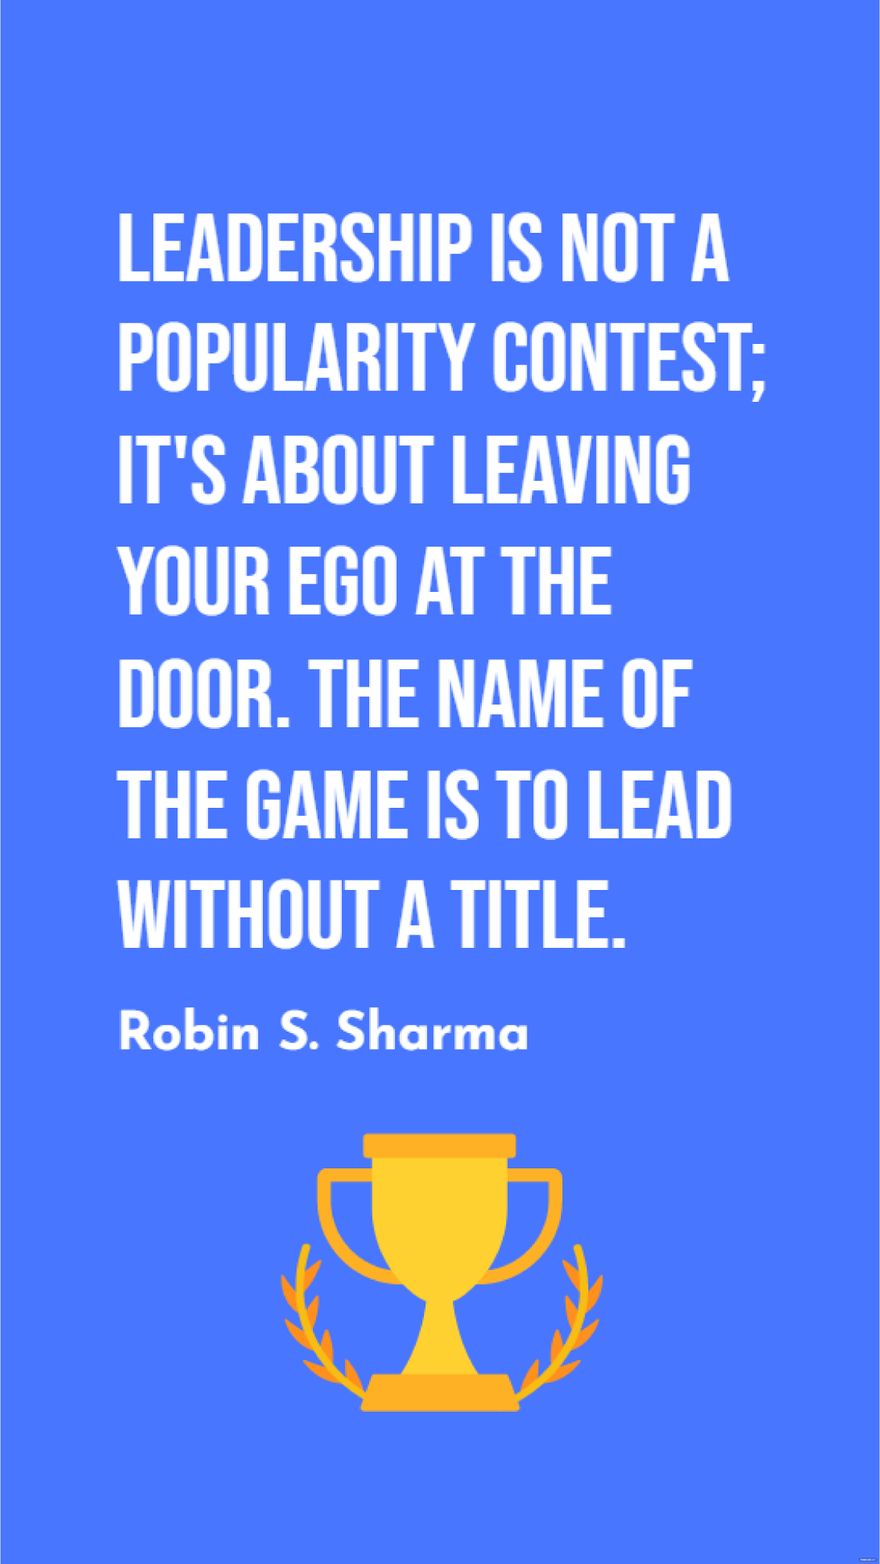 Free Robin S. Sharma - Leadership is not a popularity contest; it's about leaving your ego at the door. The name of the game is to lead without a title. in JPG